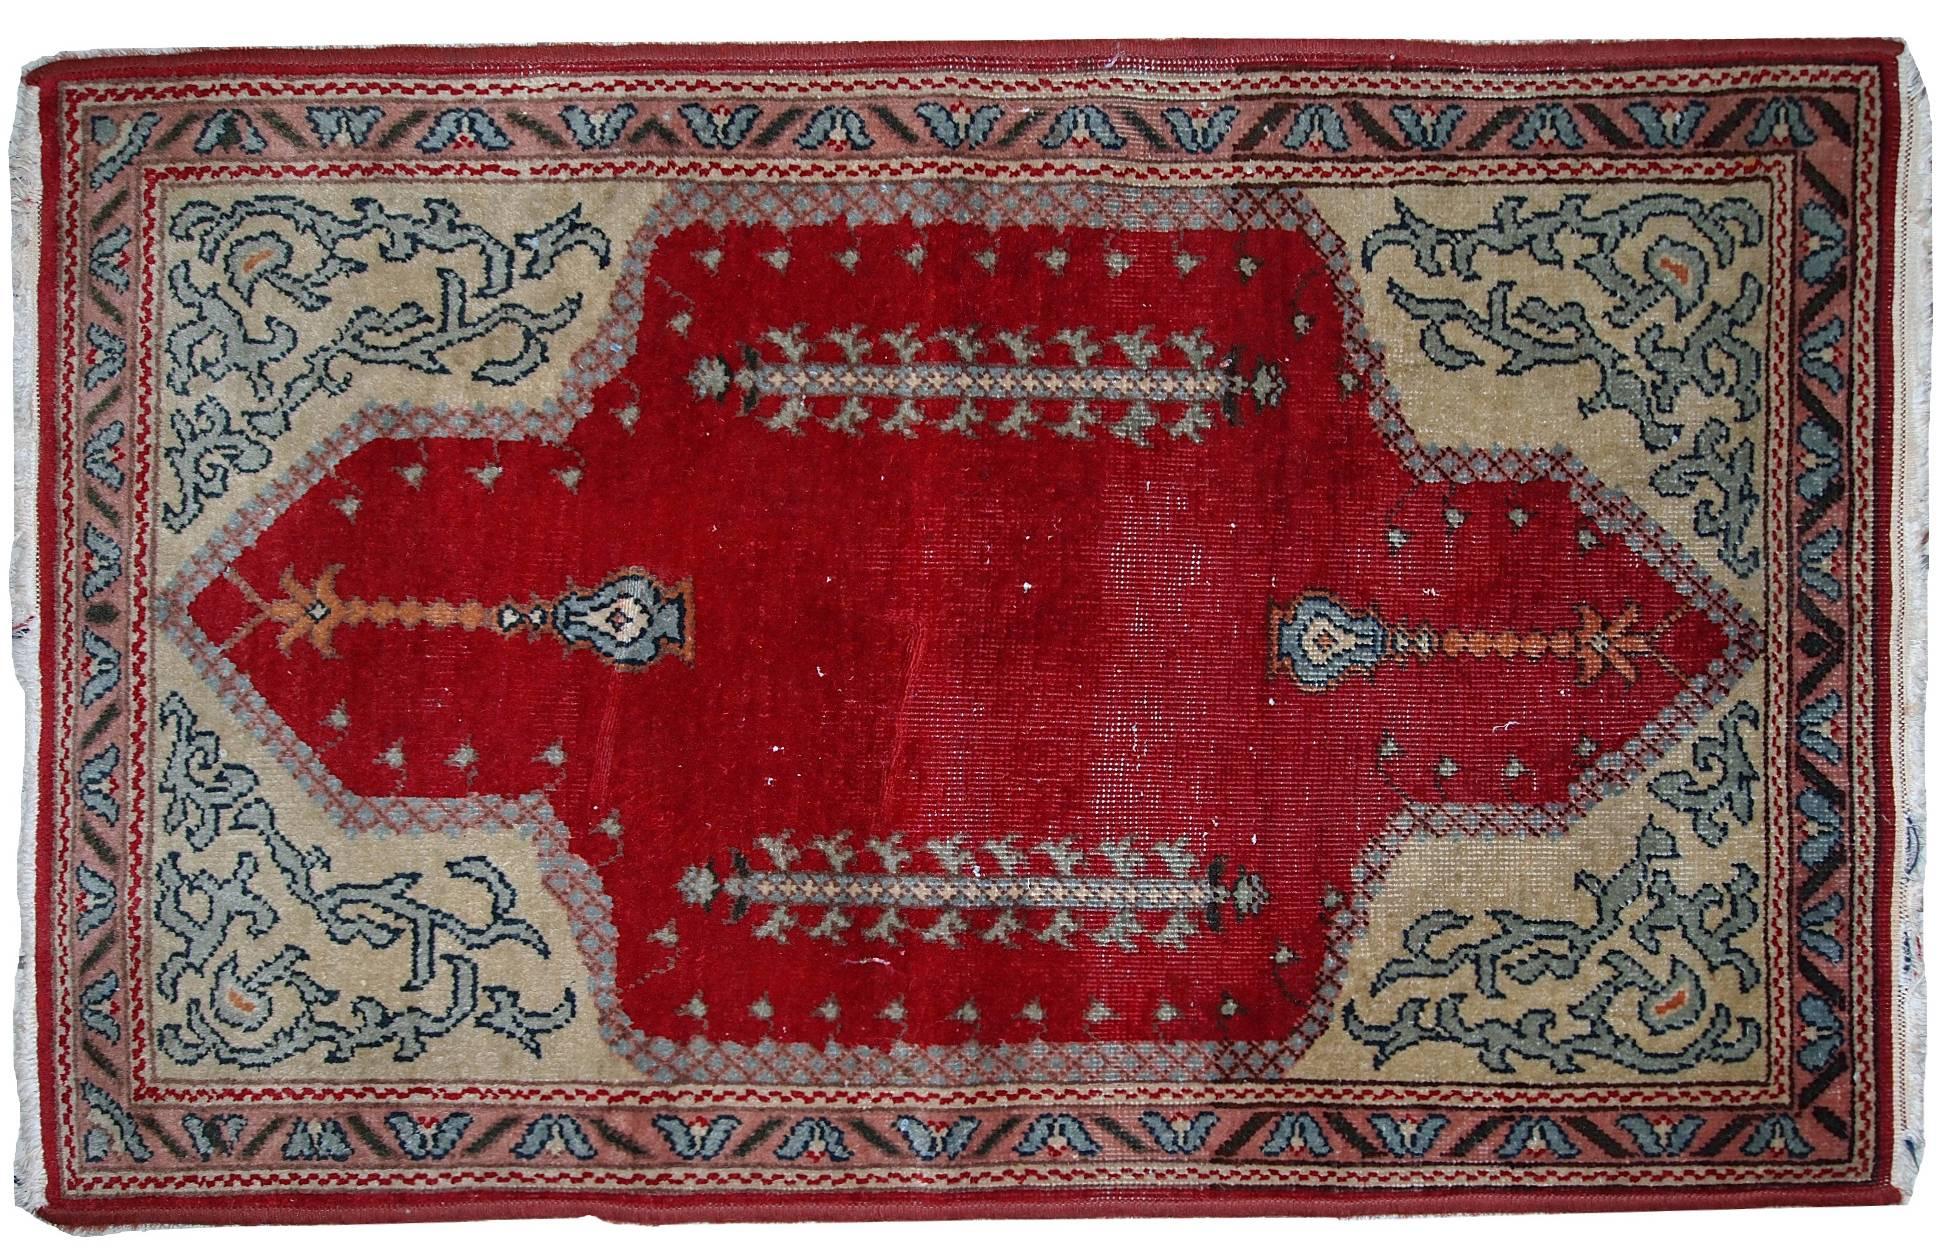 Antique Turkish Konya rug in bright red shade. Yellow corners are decorated in traditional ornaments of azure color. The rug made out of wool. It has some low pile, but generally in original good condition.
 